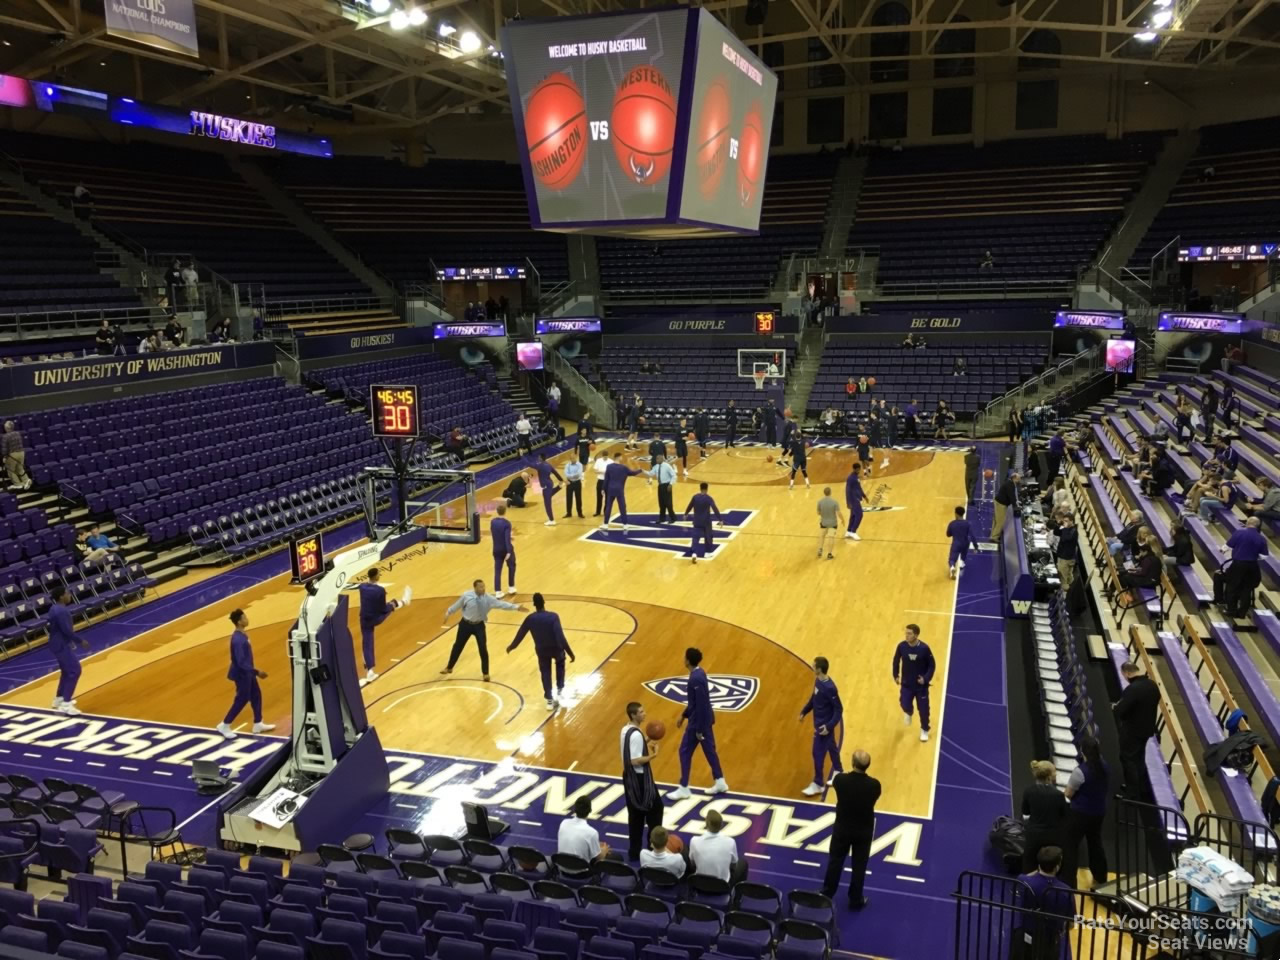 section 4, row 10 seat view  - alaska airlines arena